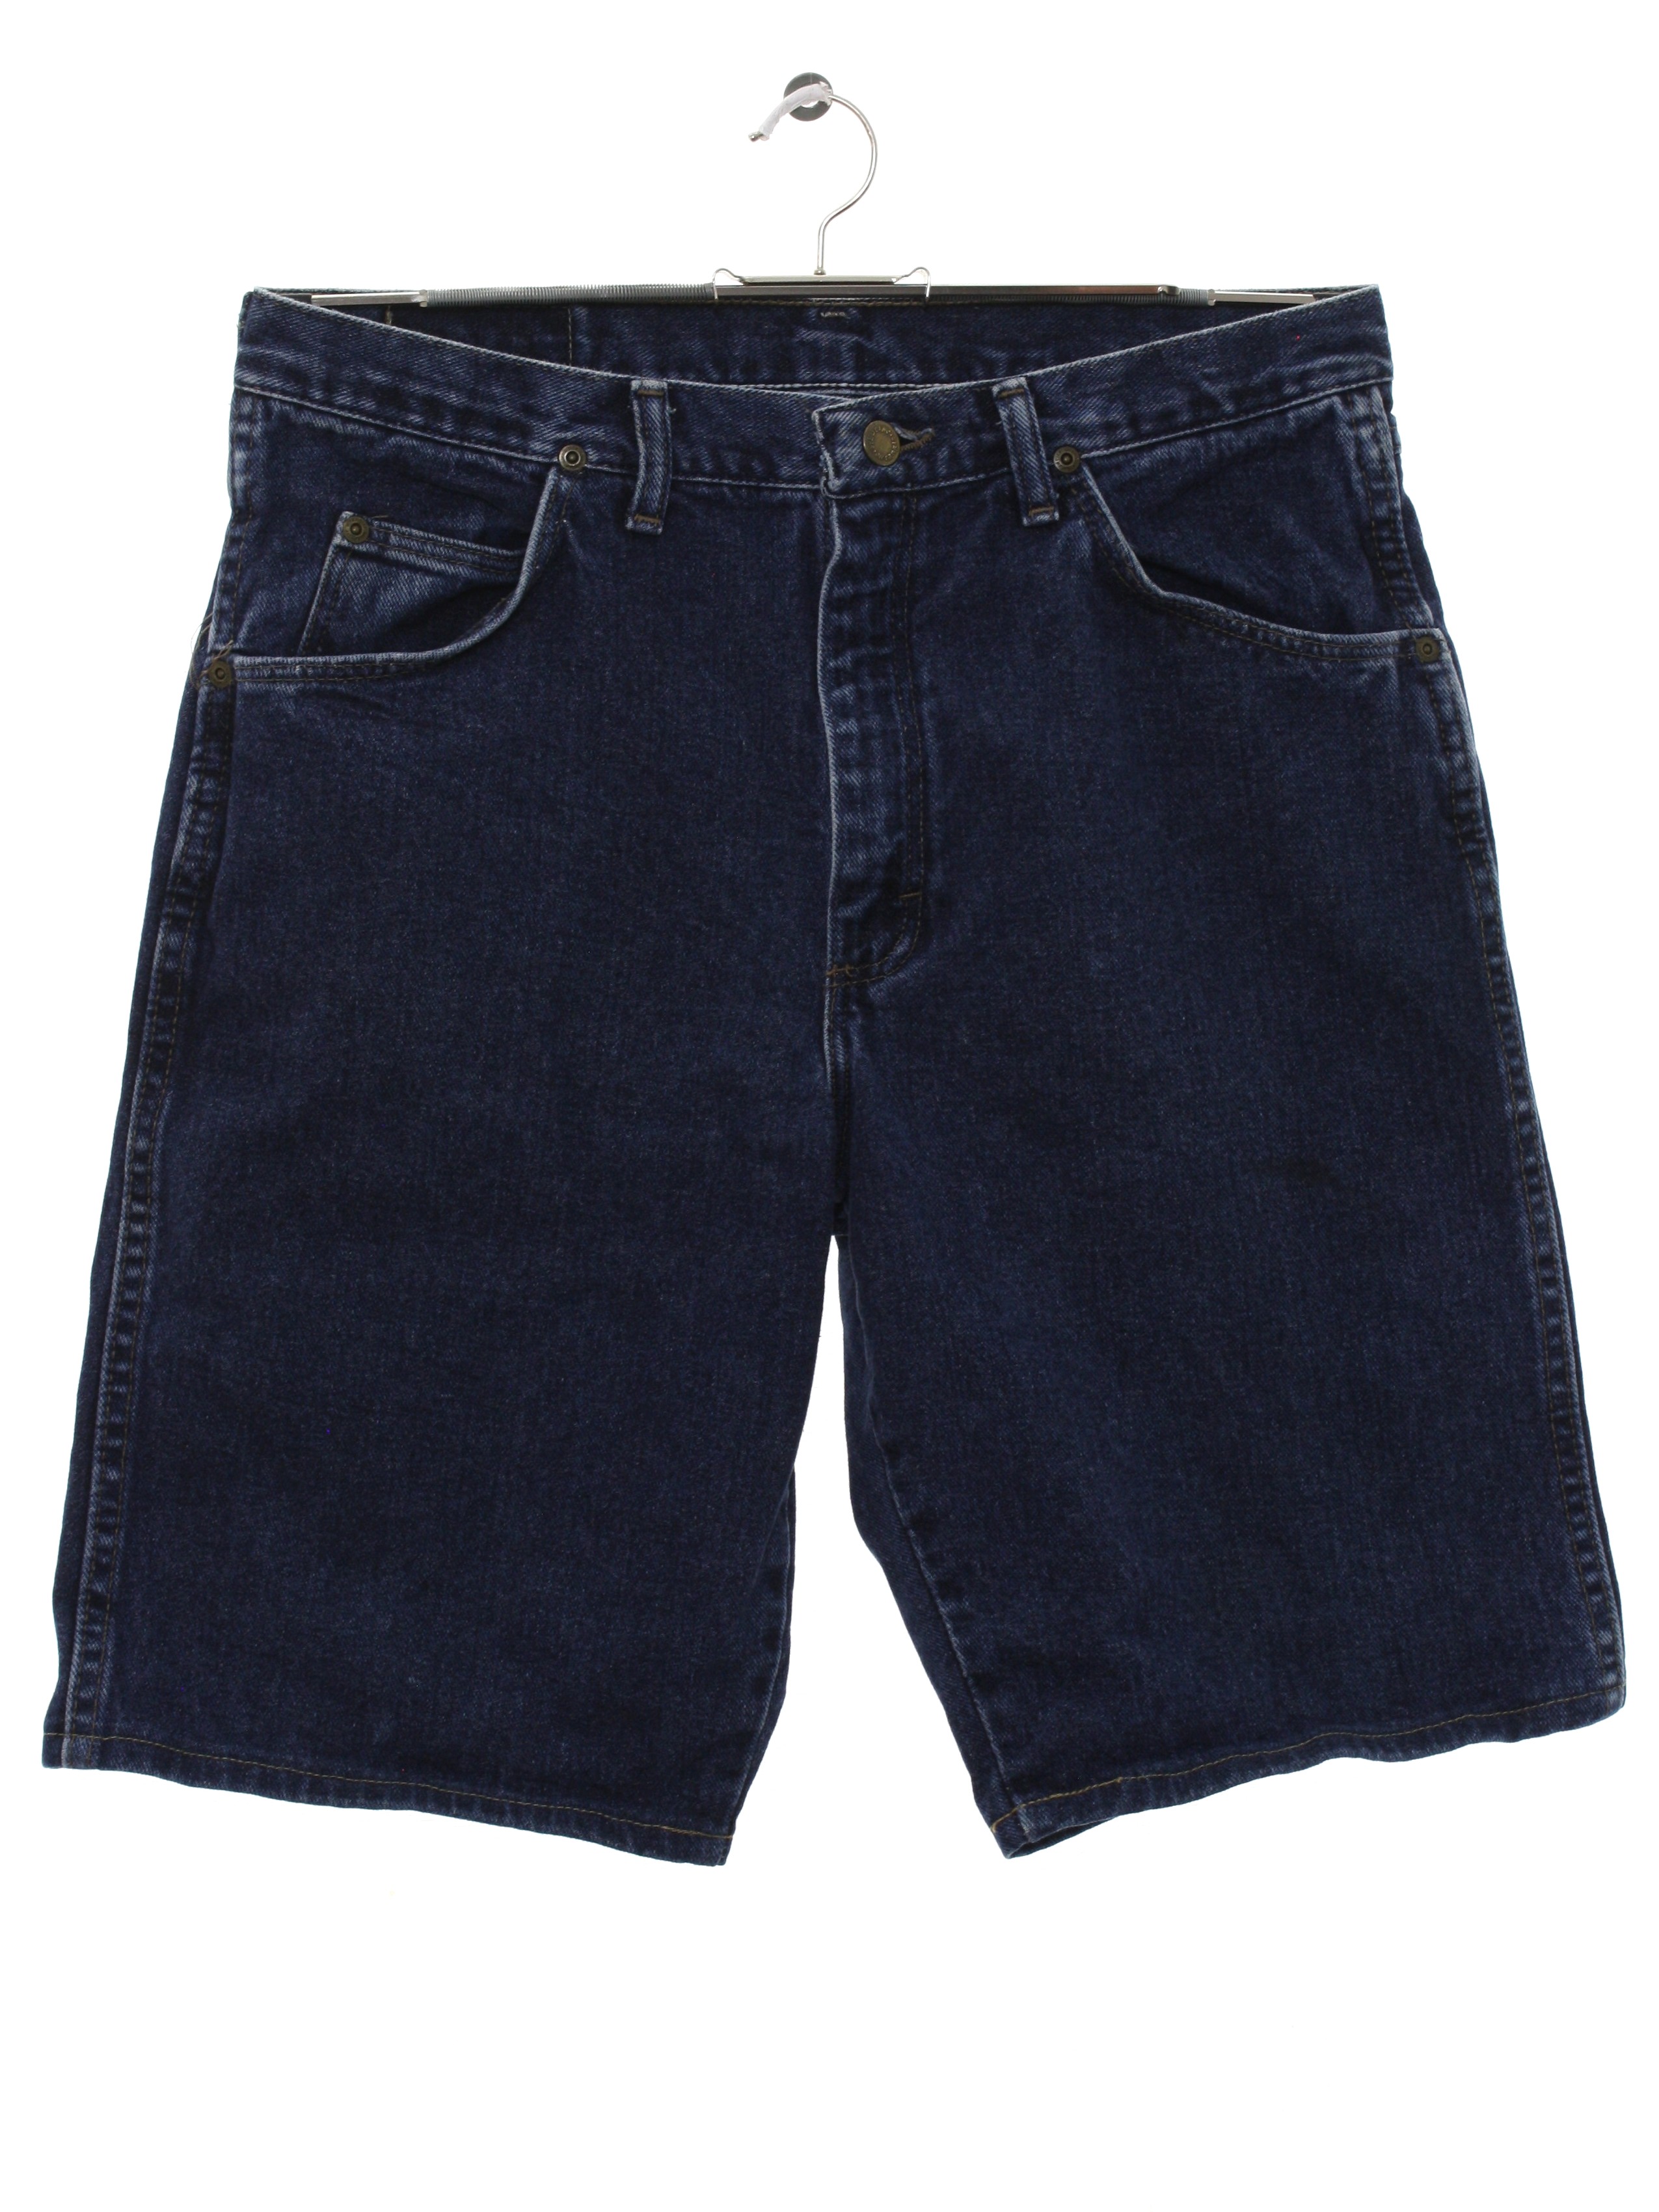 Vintage 1980's Shorts: Late 80s or Early 90s -Wrangler- Mens dark blue ...